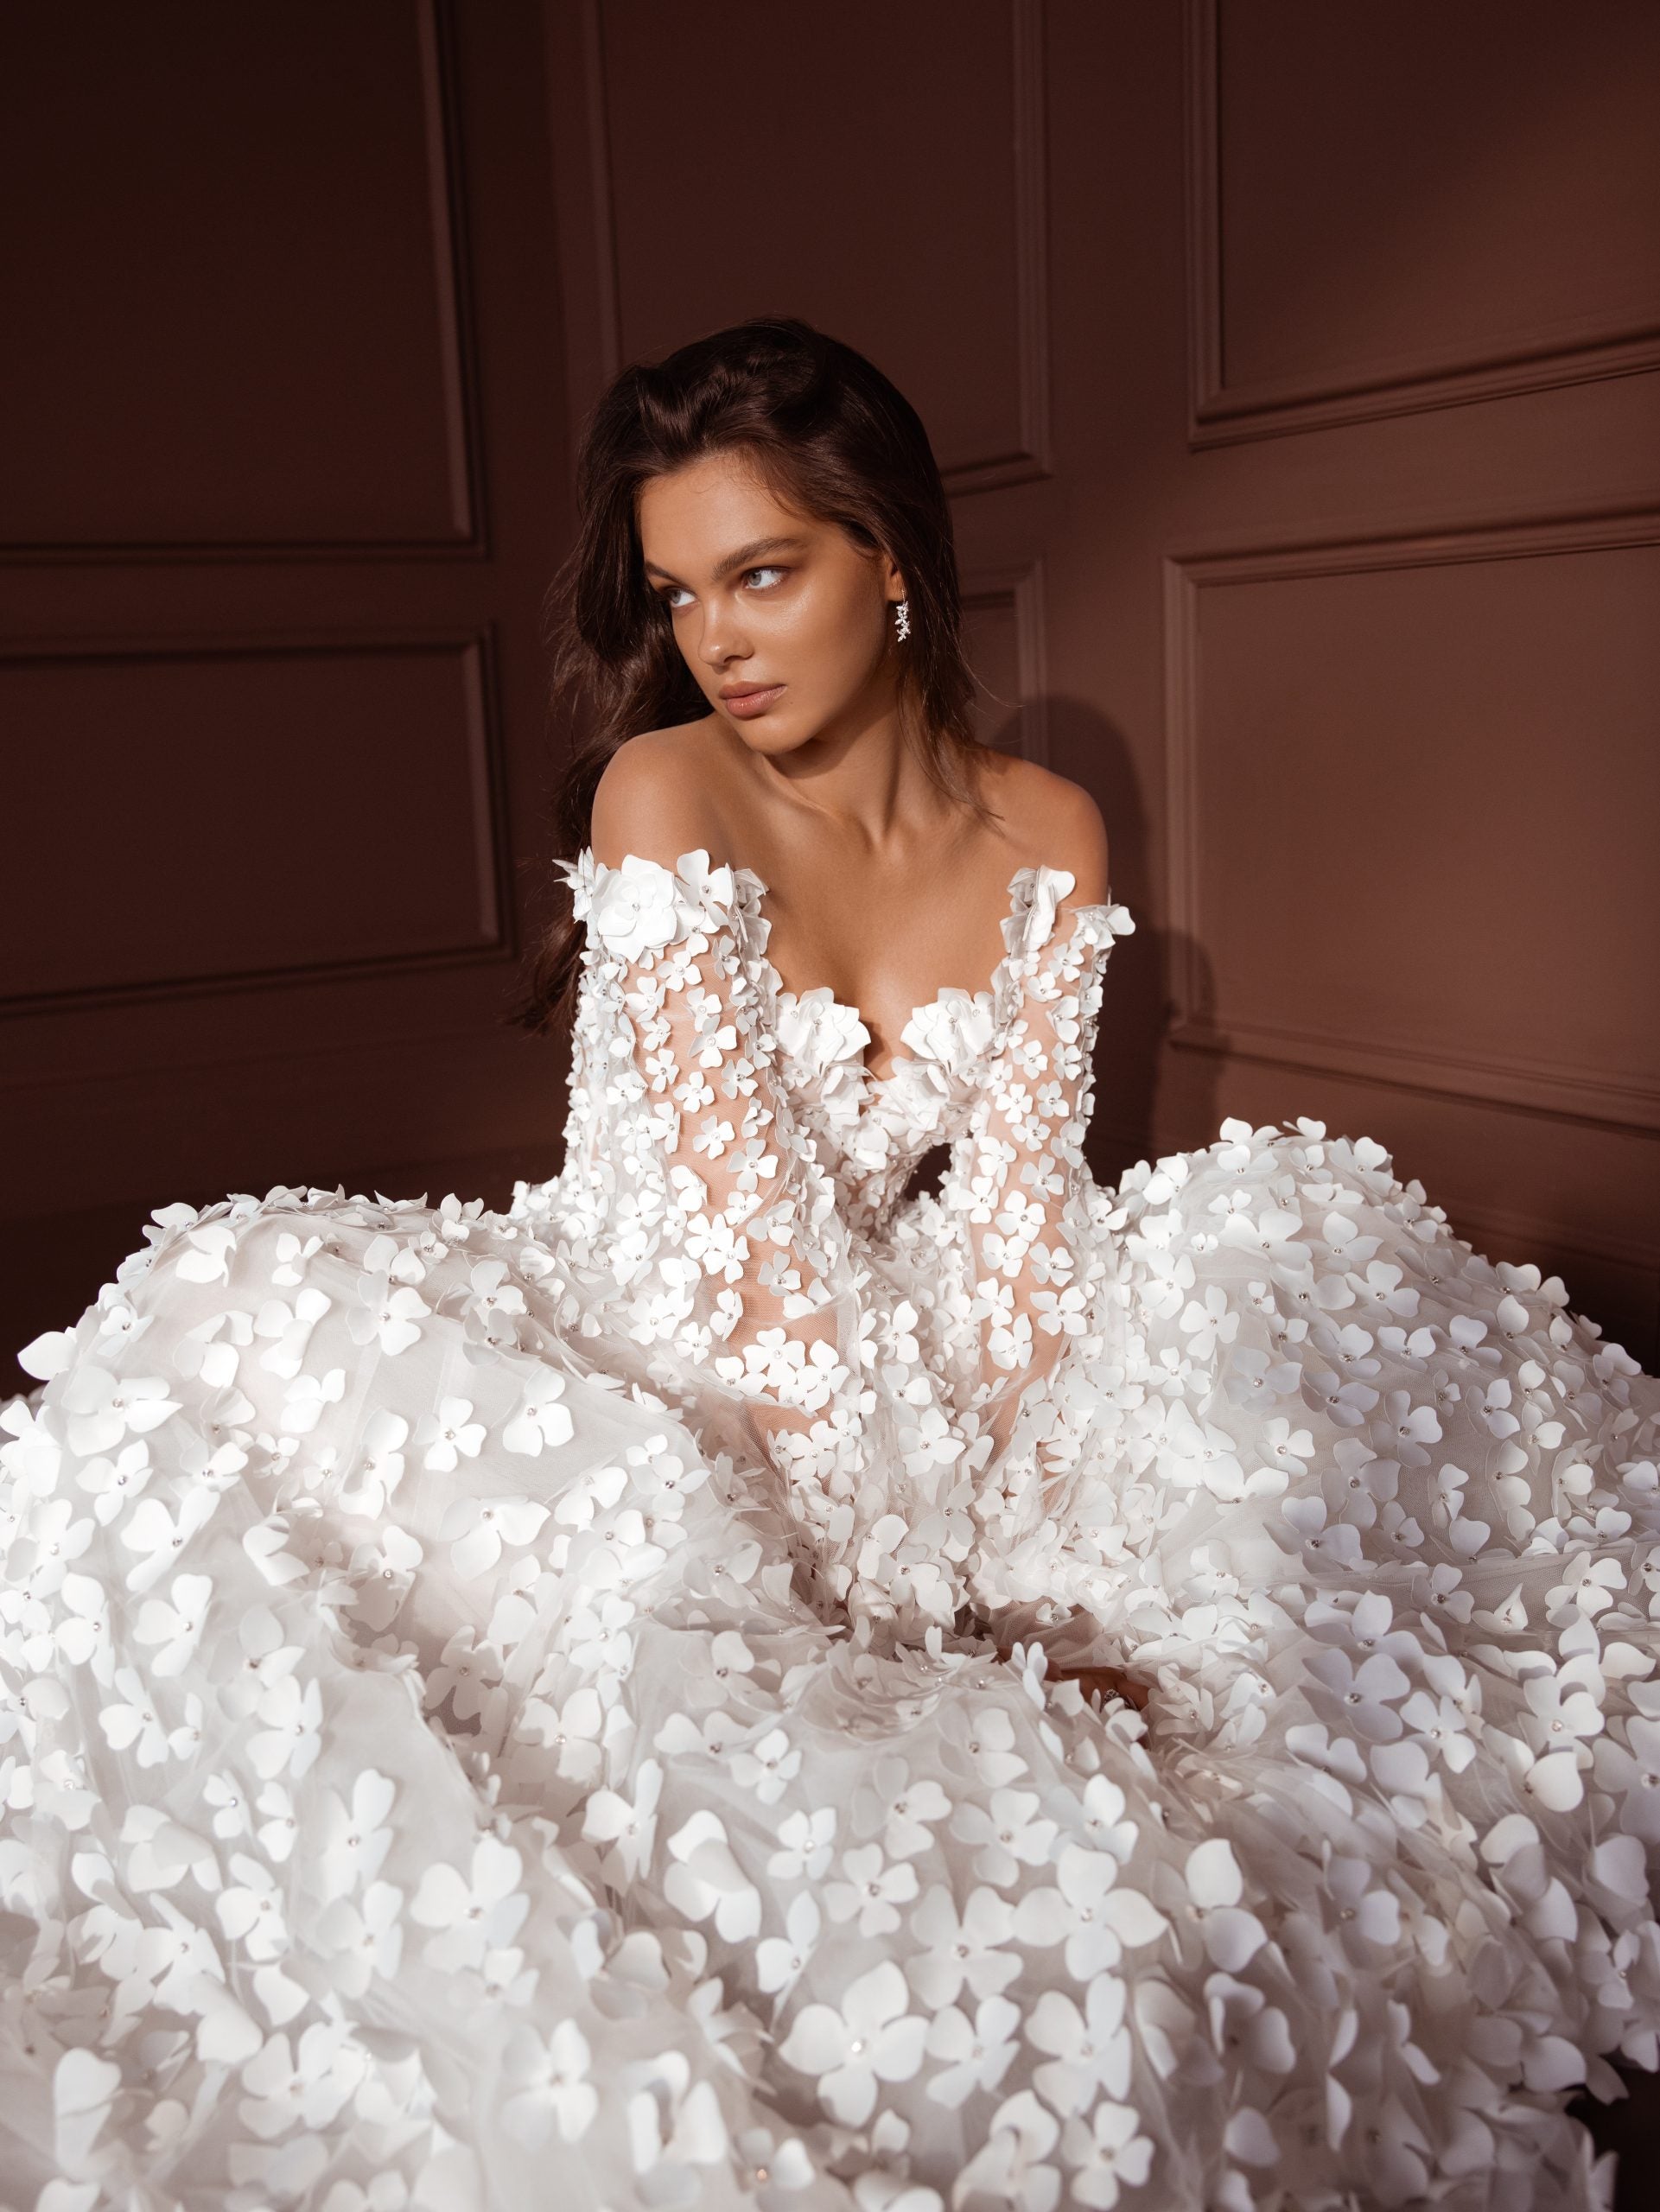 Laser Cut Flower A-Line Gown by Pnina Tornai - Image 3